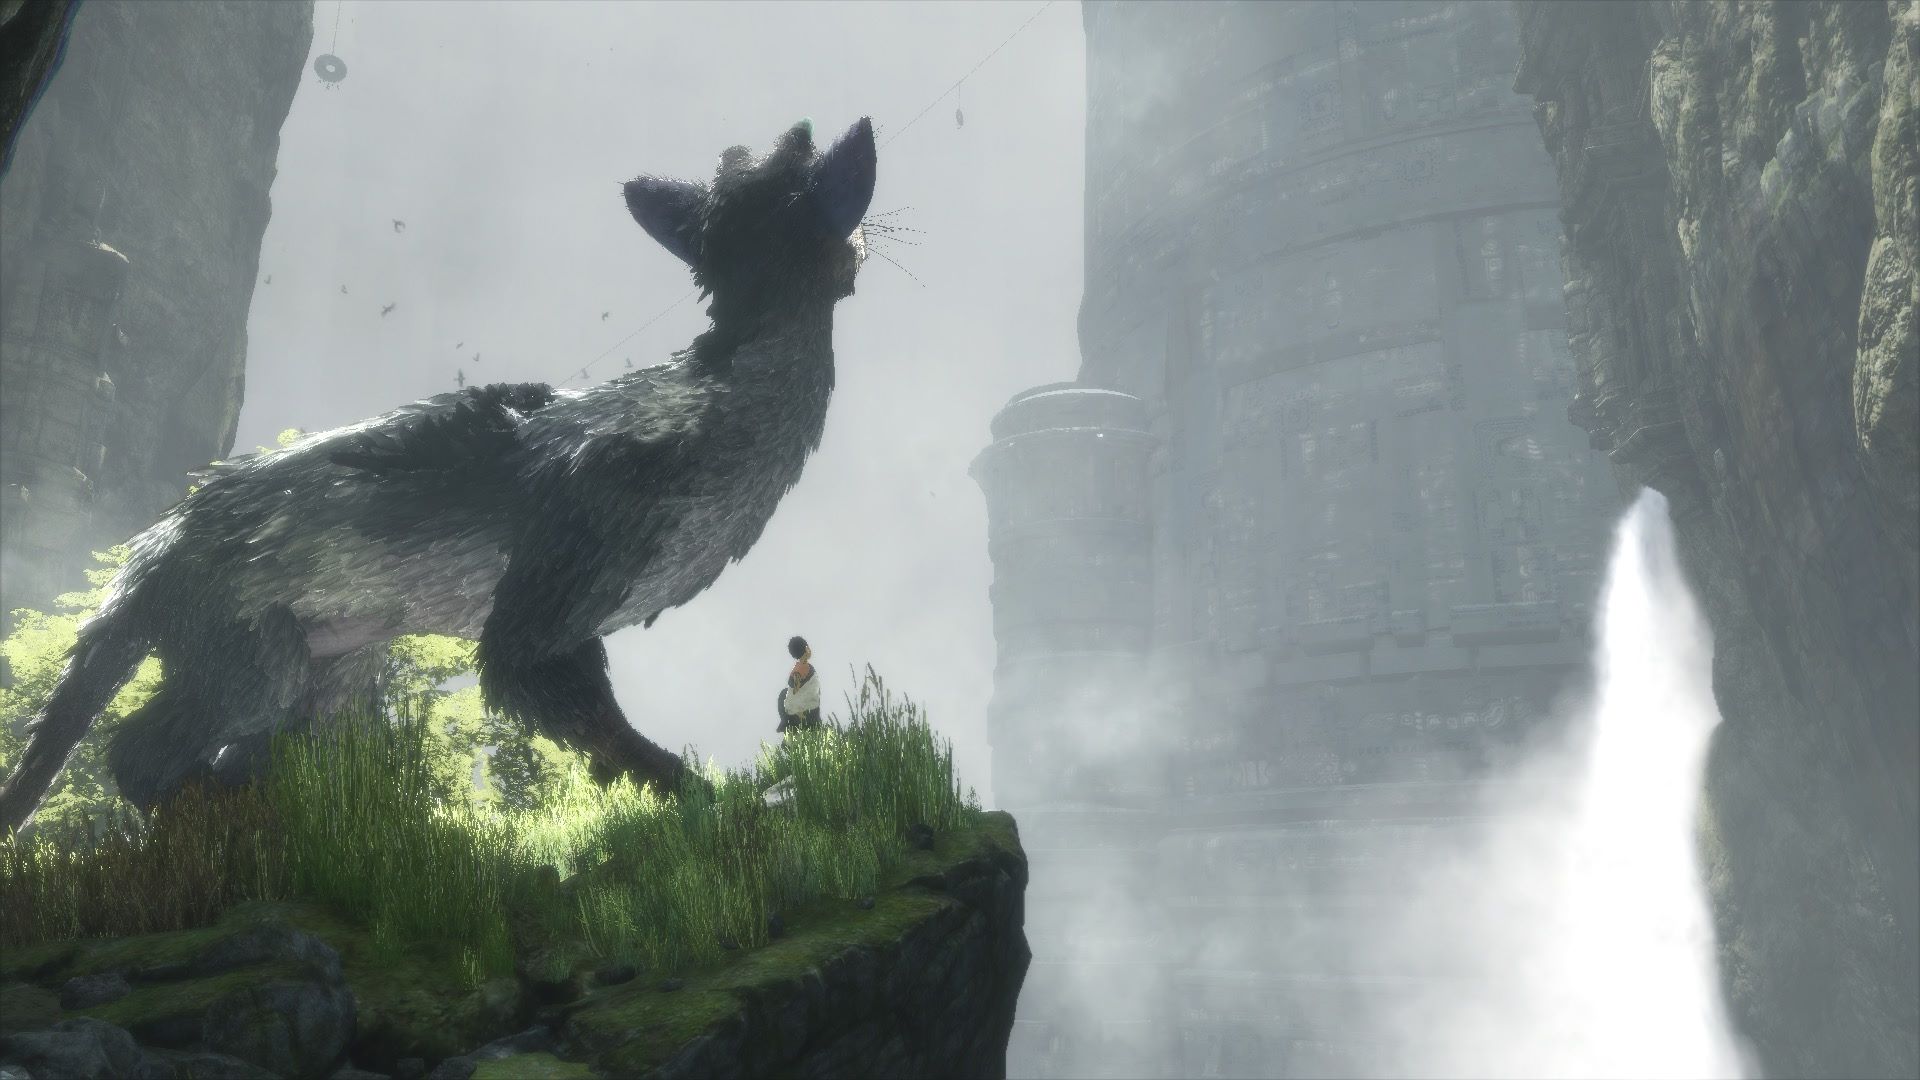 play3 Review: Test: The Last Guardian: Fantasy-Abenteuer voller Emotionen